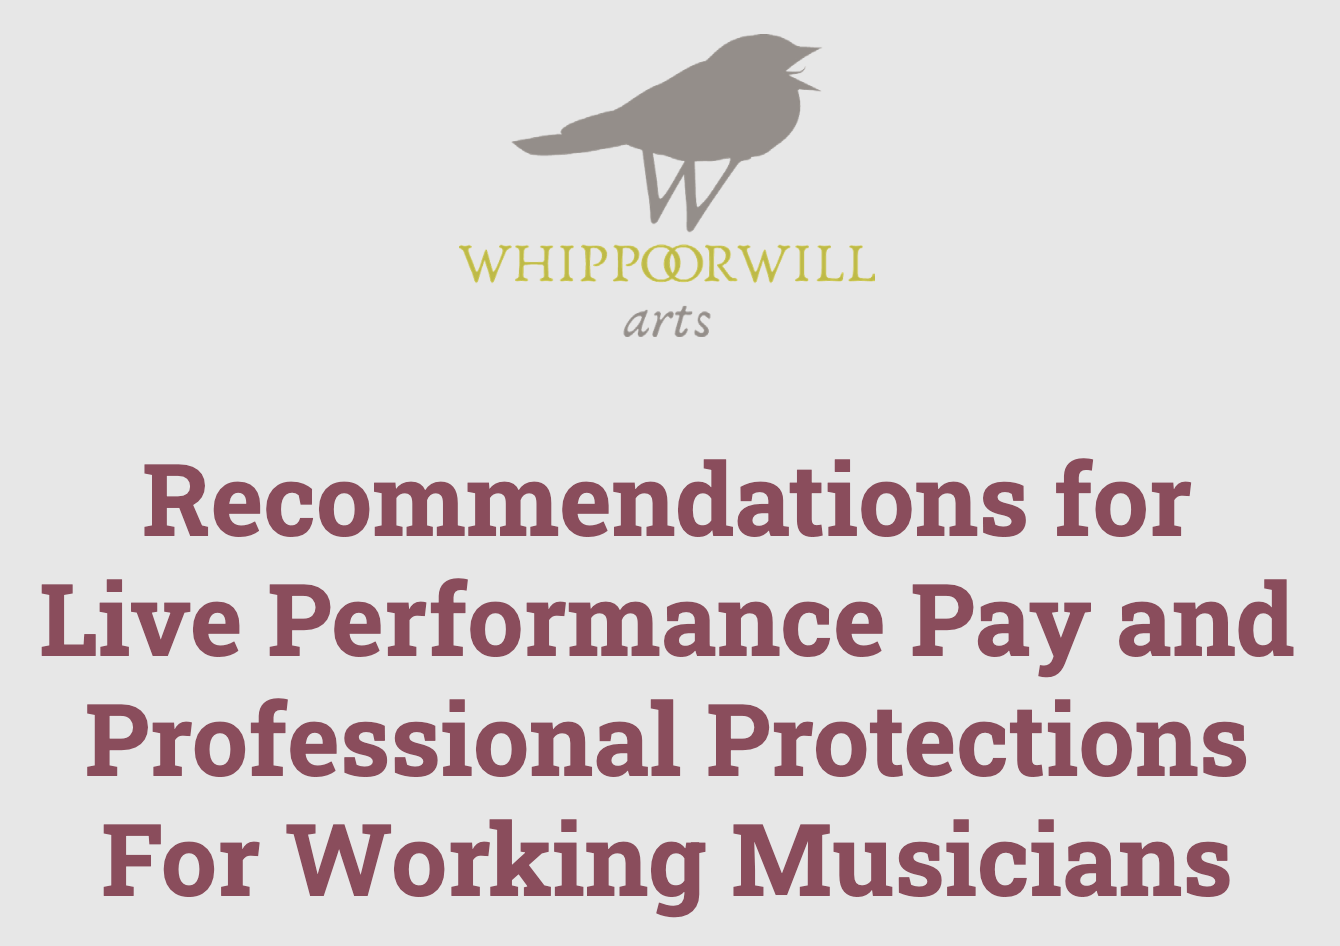 Image of the Whippoorwill Arts logo - a bird silhouette over the name "Whippoorwill Arts". Below the logo is a photo of the Whippoorwill Arts study with the title words "Recommendations for Live Performance Pay and Professional Protections for Working Musicians"